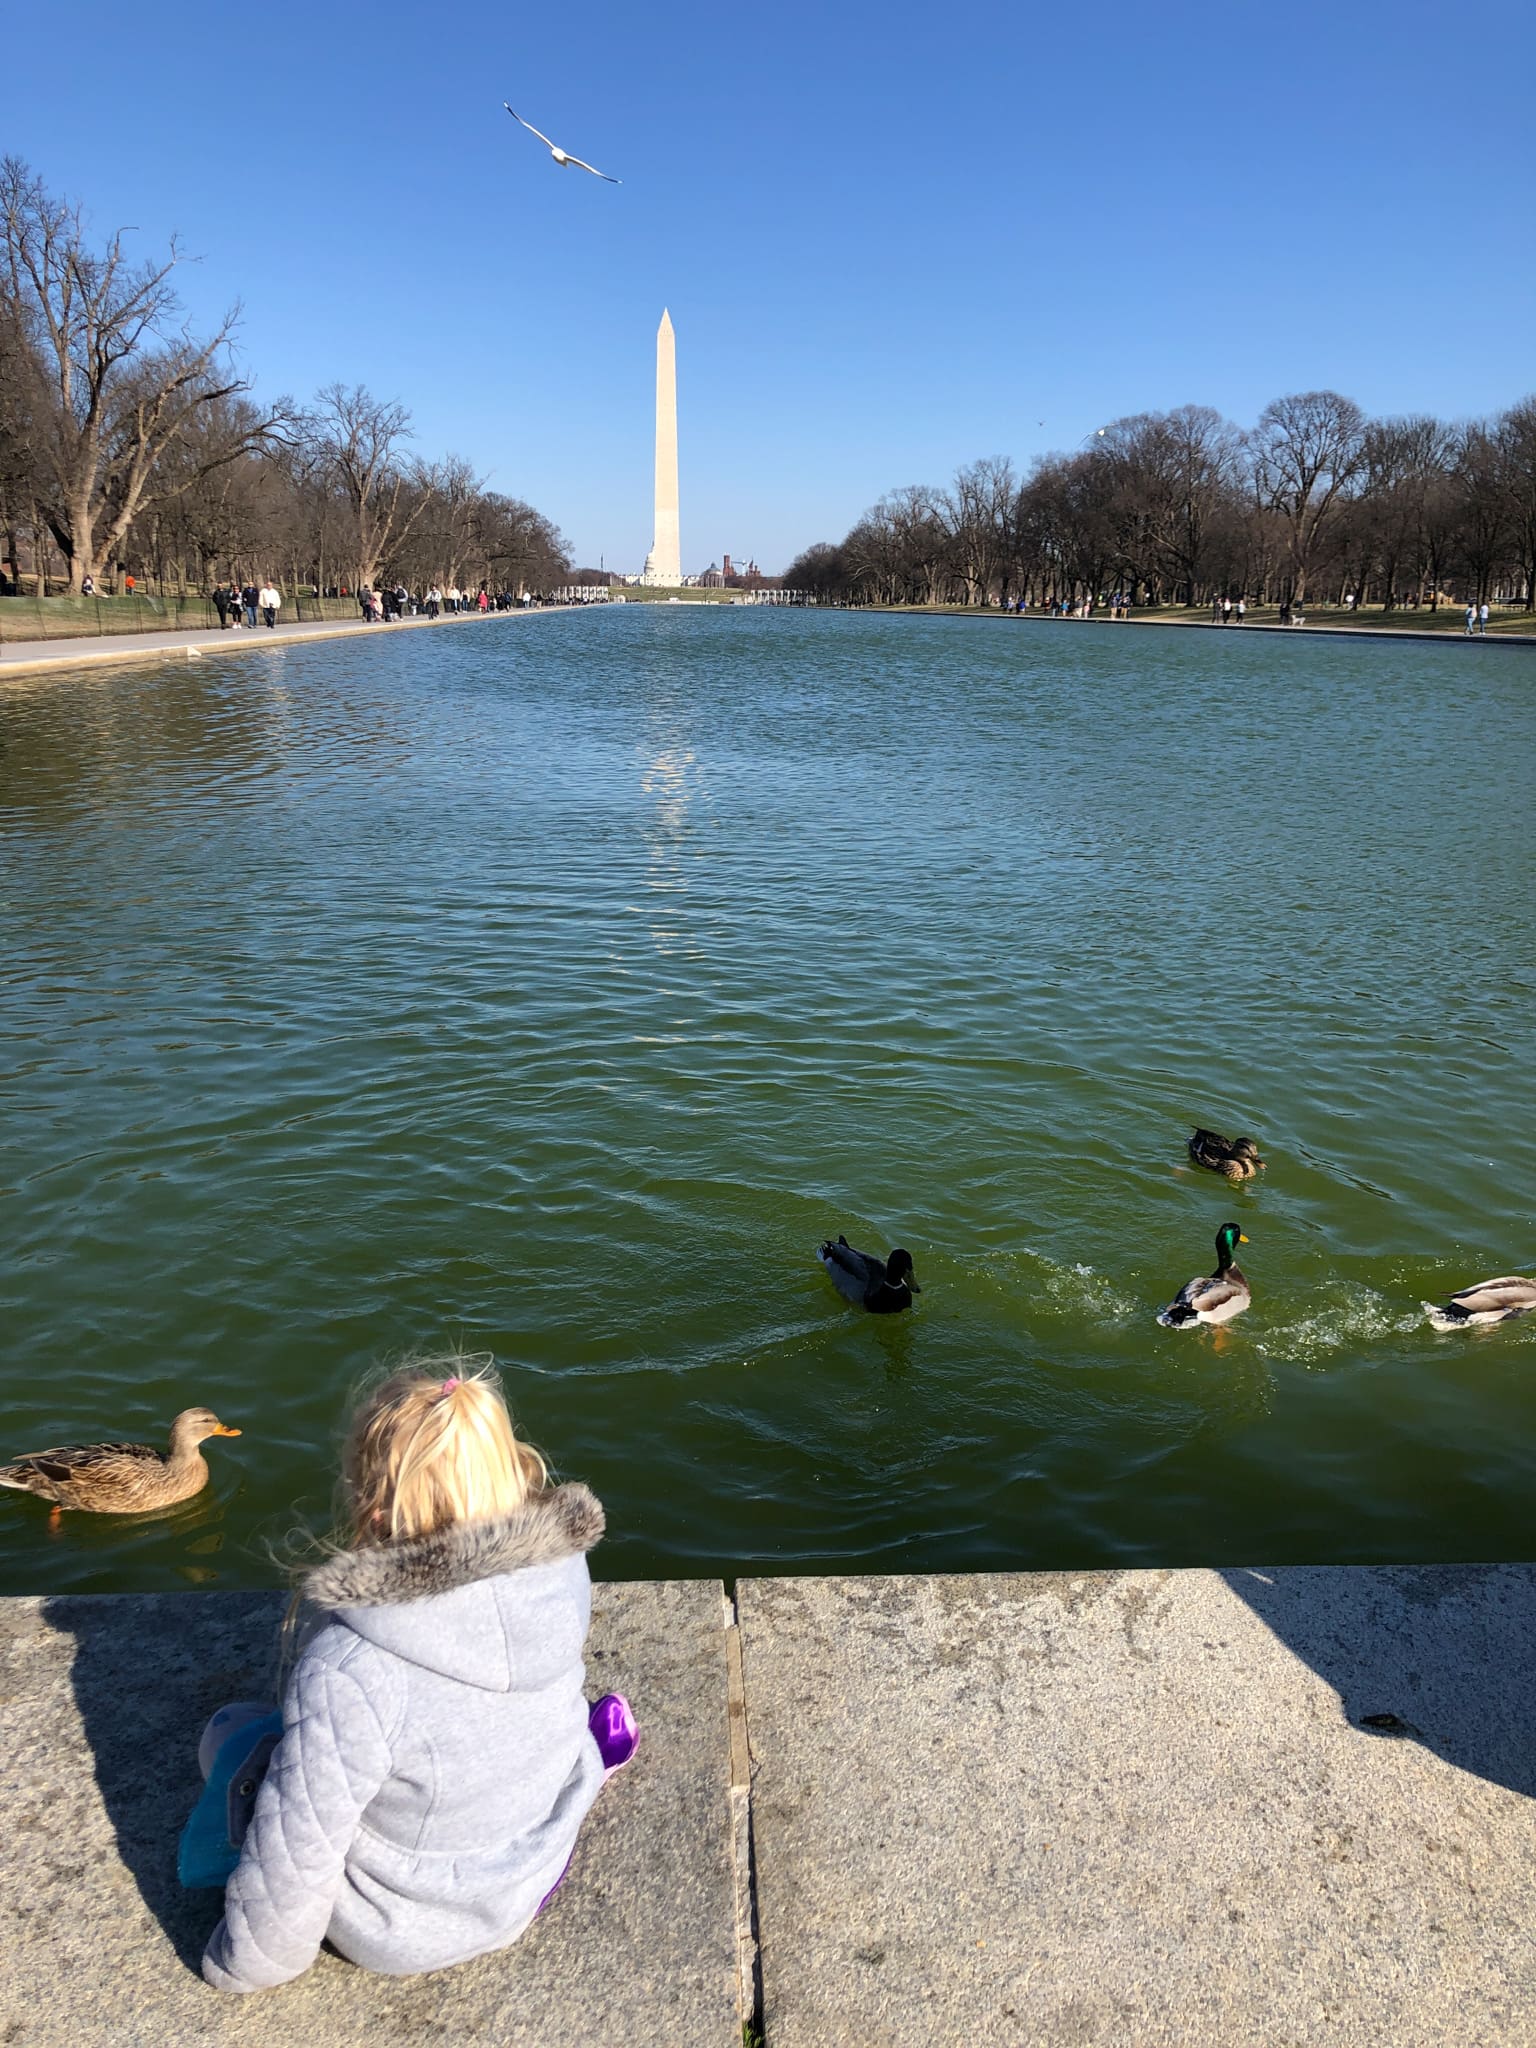 watching the ducks in the reflecting pool